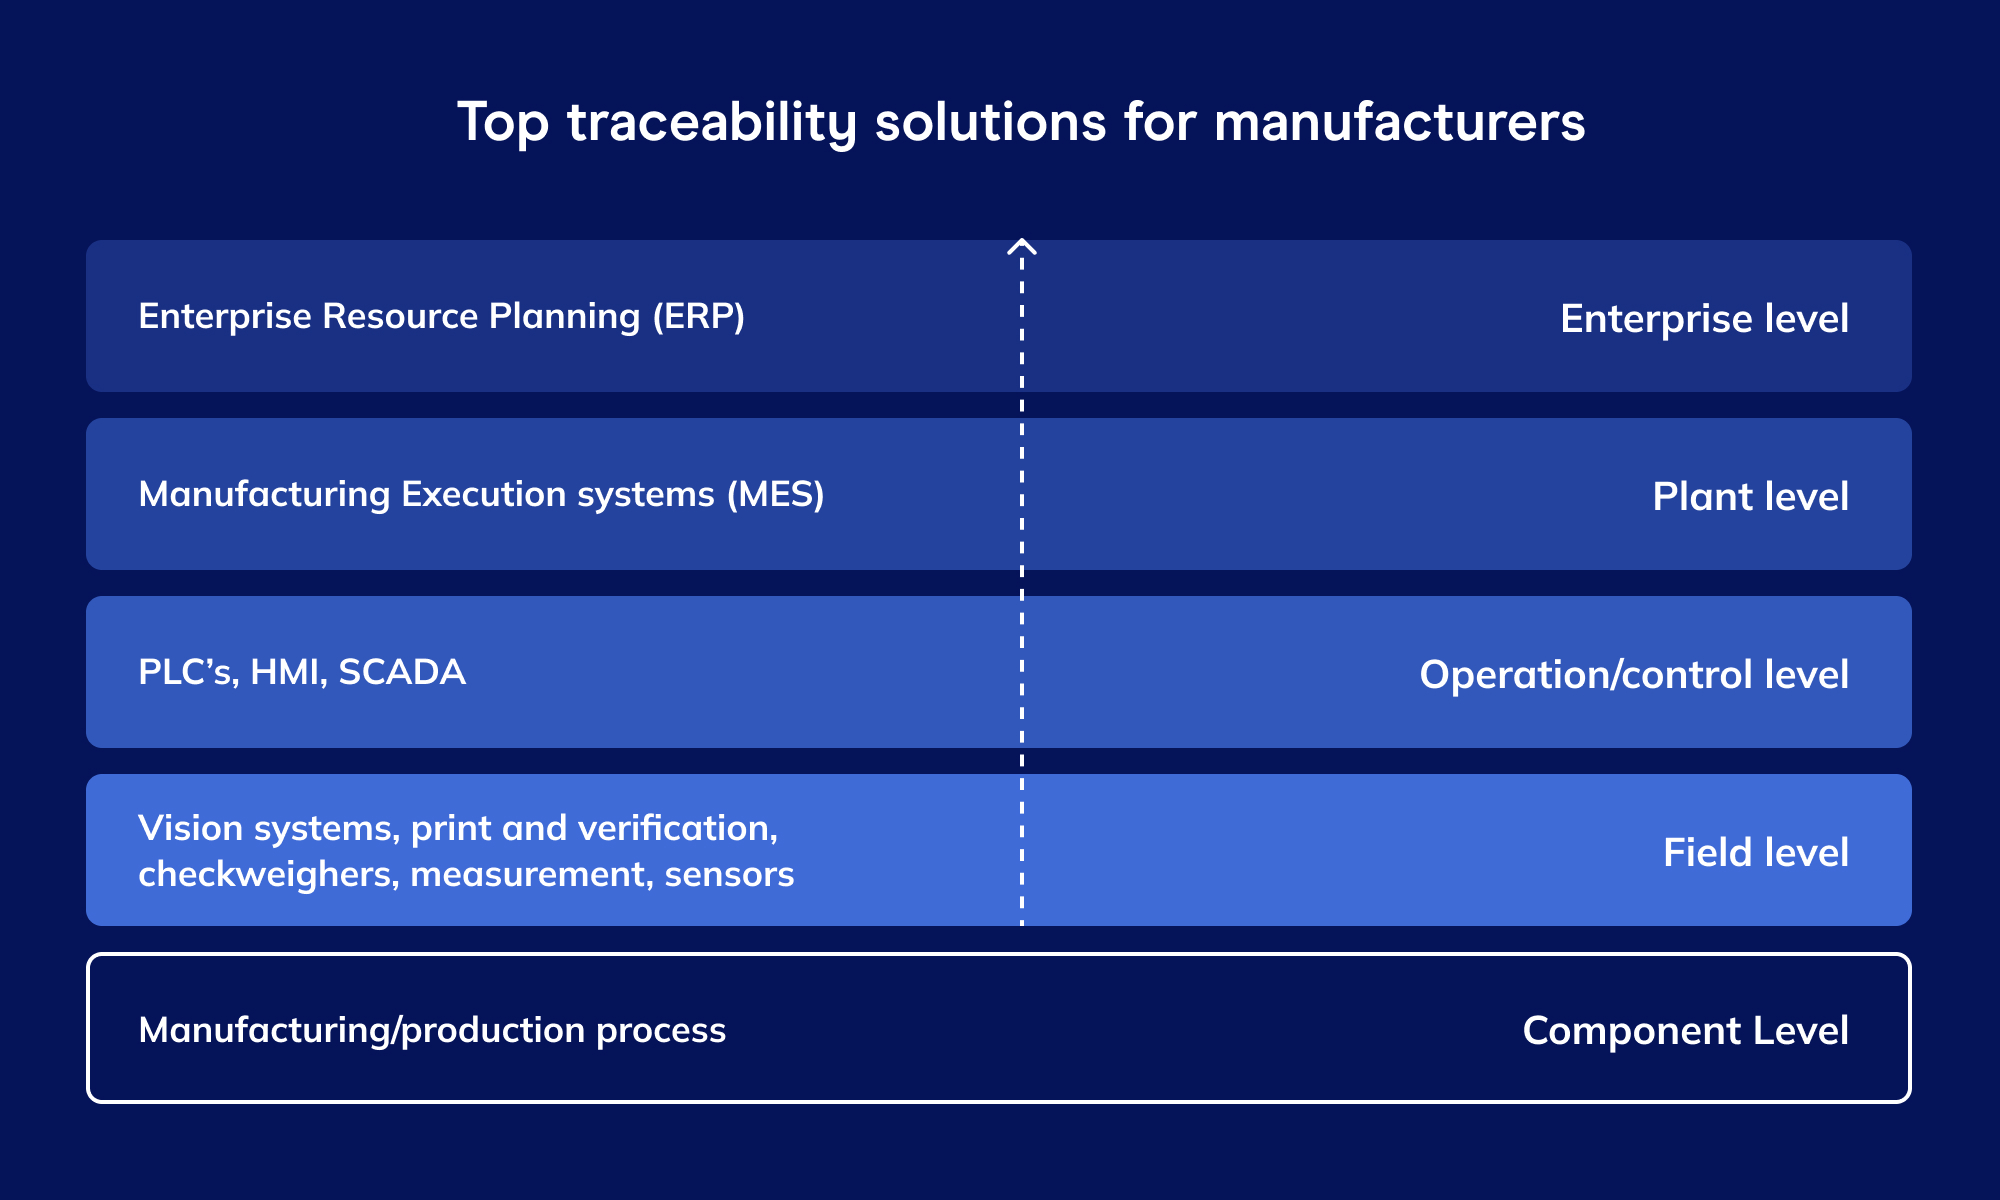 Top traceability solutions